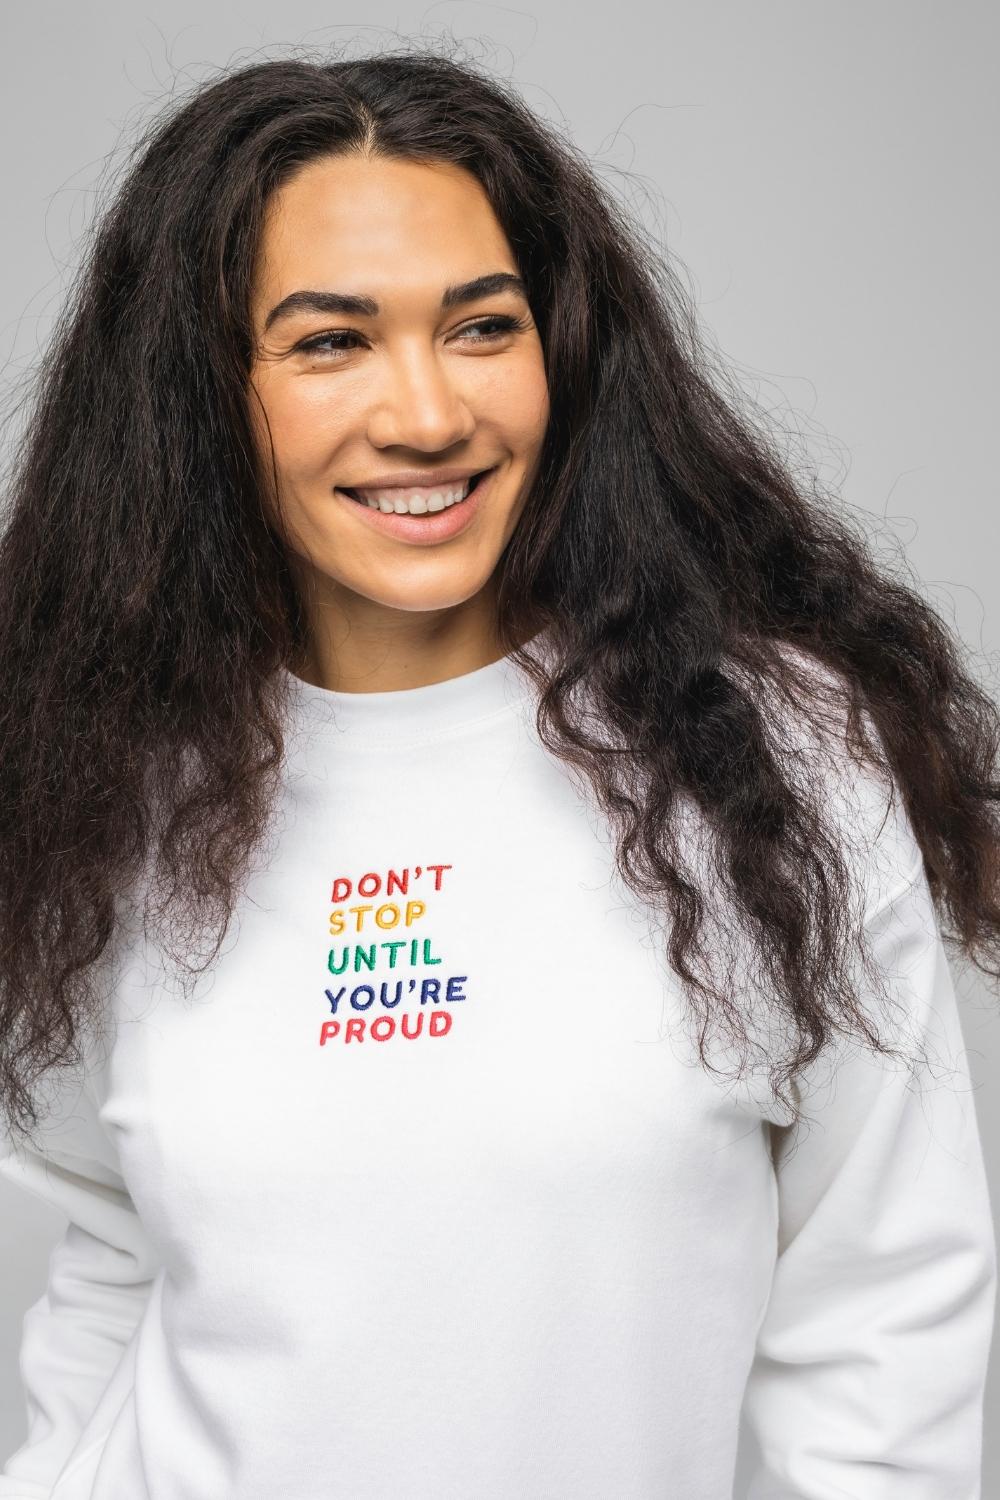 Don't Stop Until You're Proud  Embroidery Sweatshirt